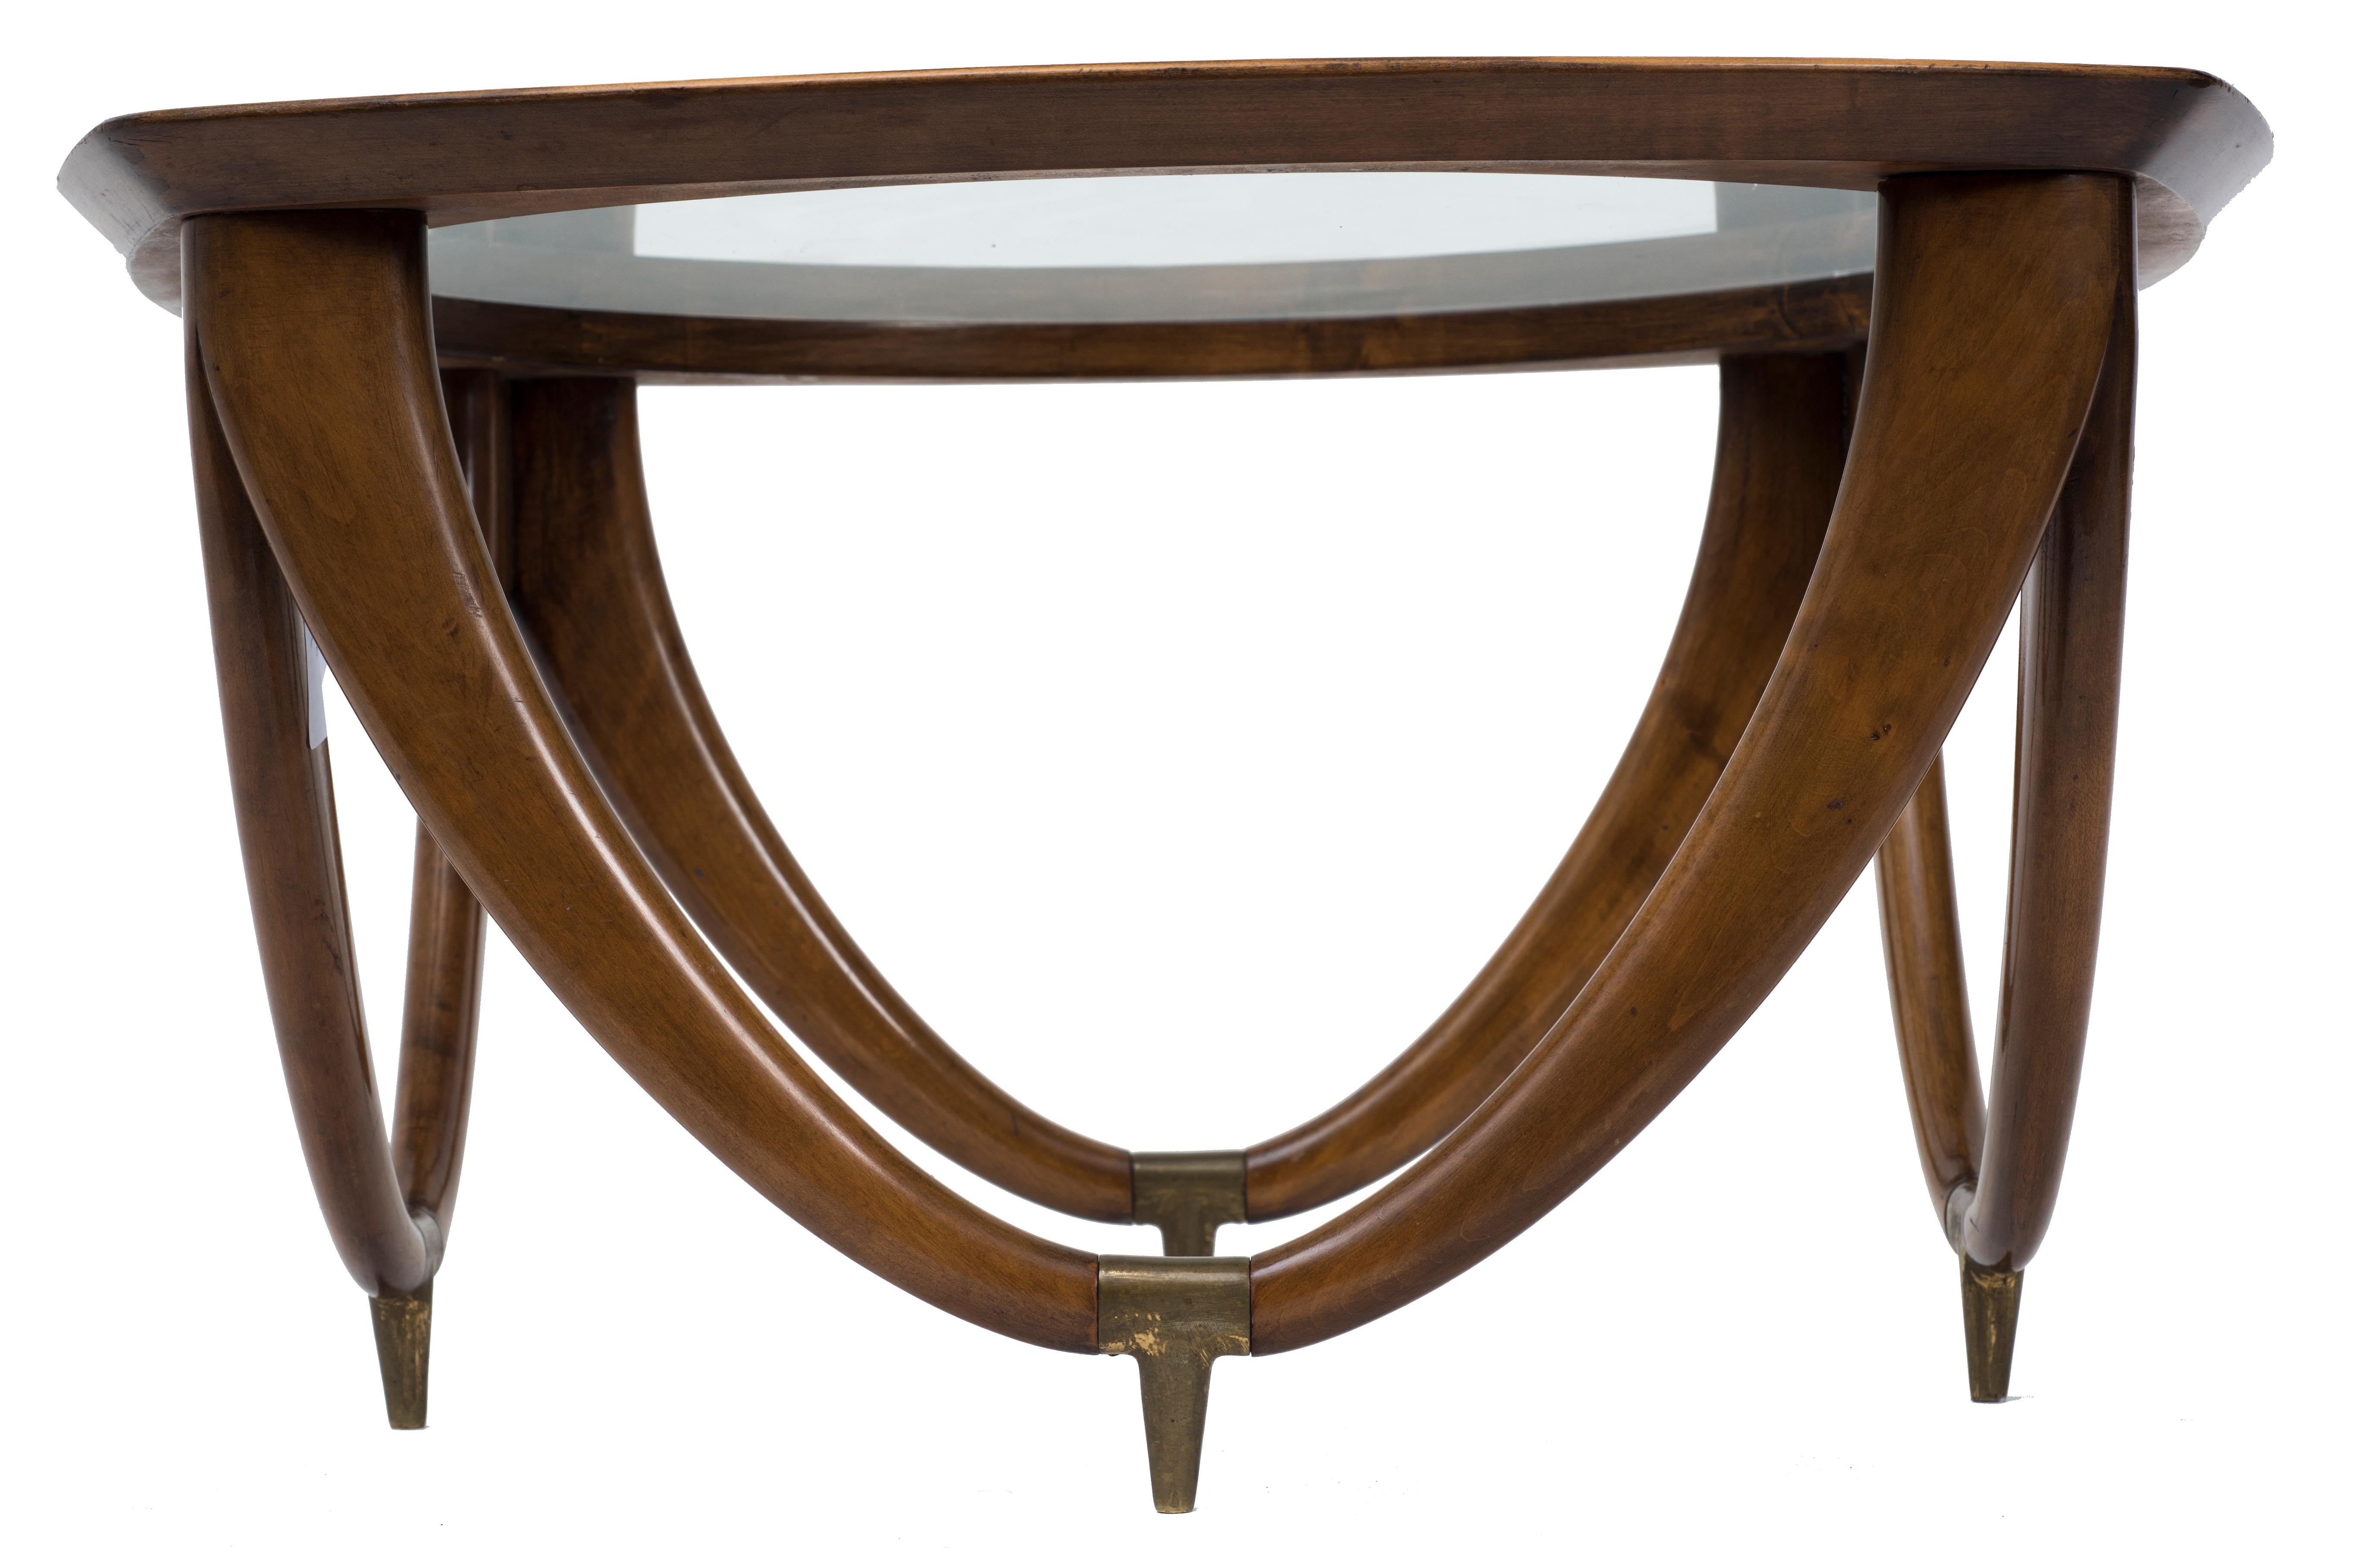 Wooden table with glass
Production: Italy, circa 1950.
Very good conditions.